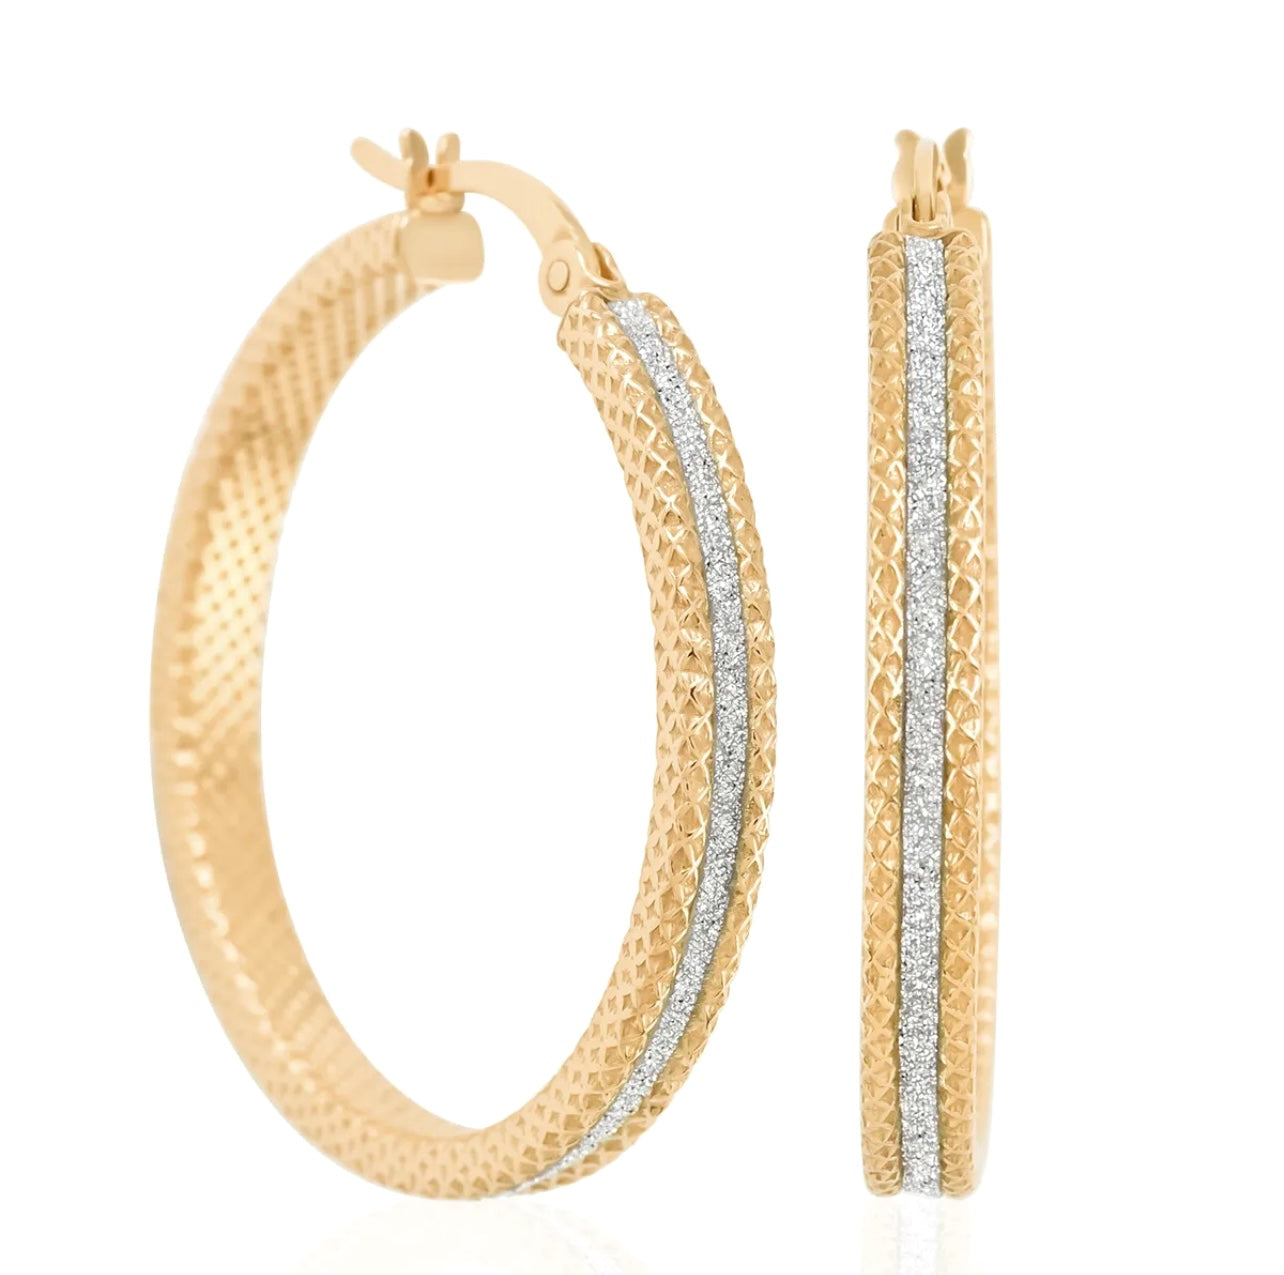 Sparkle Two-Tone Sterling Silver & Gold Hoops 1.41”